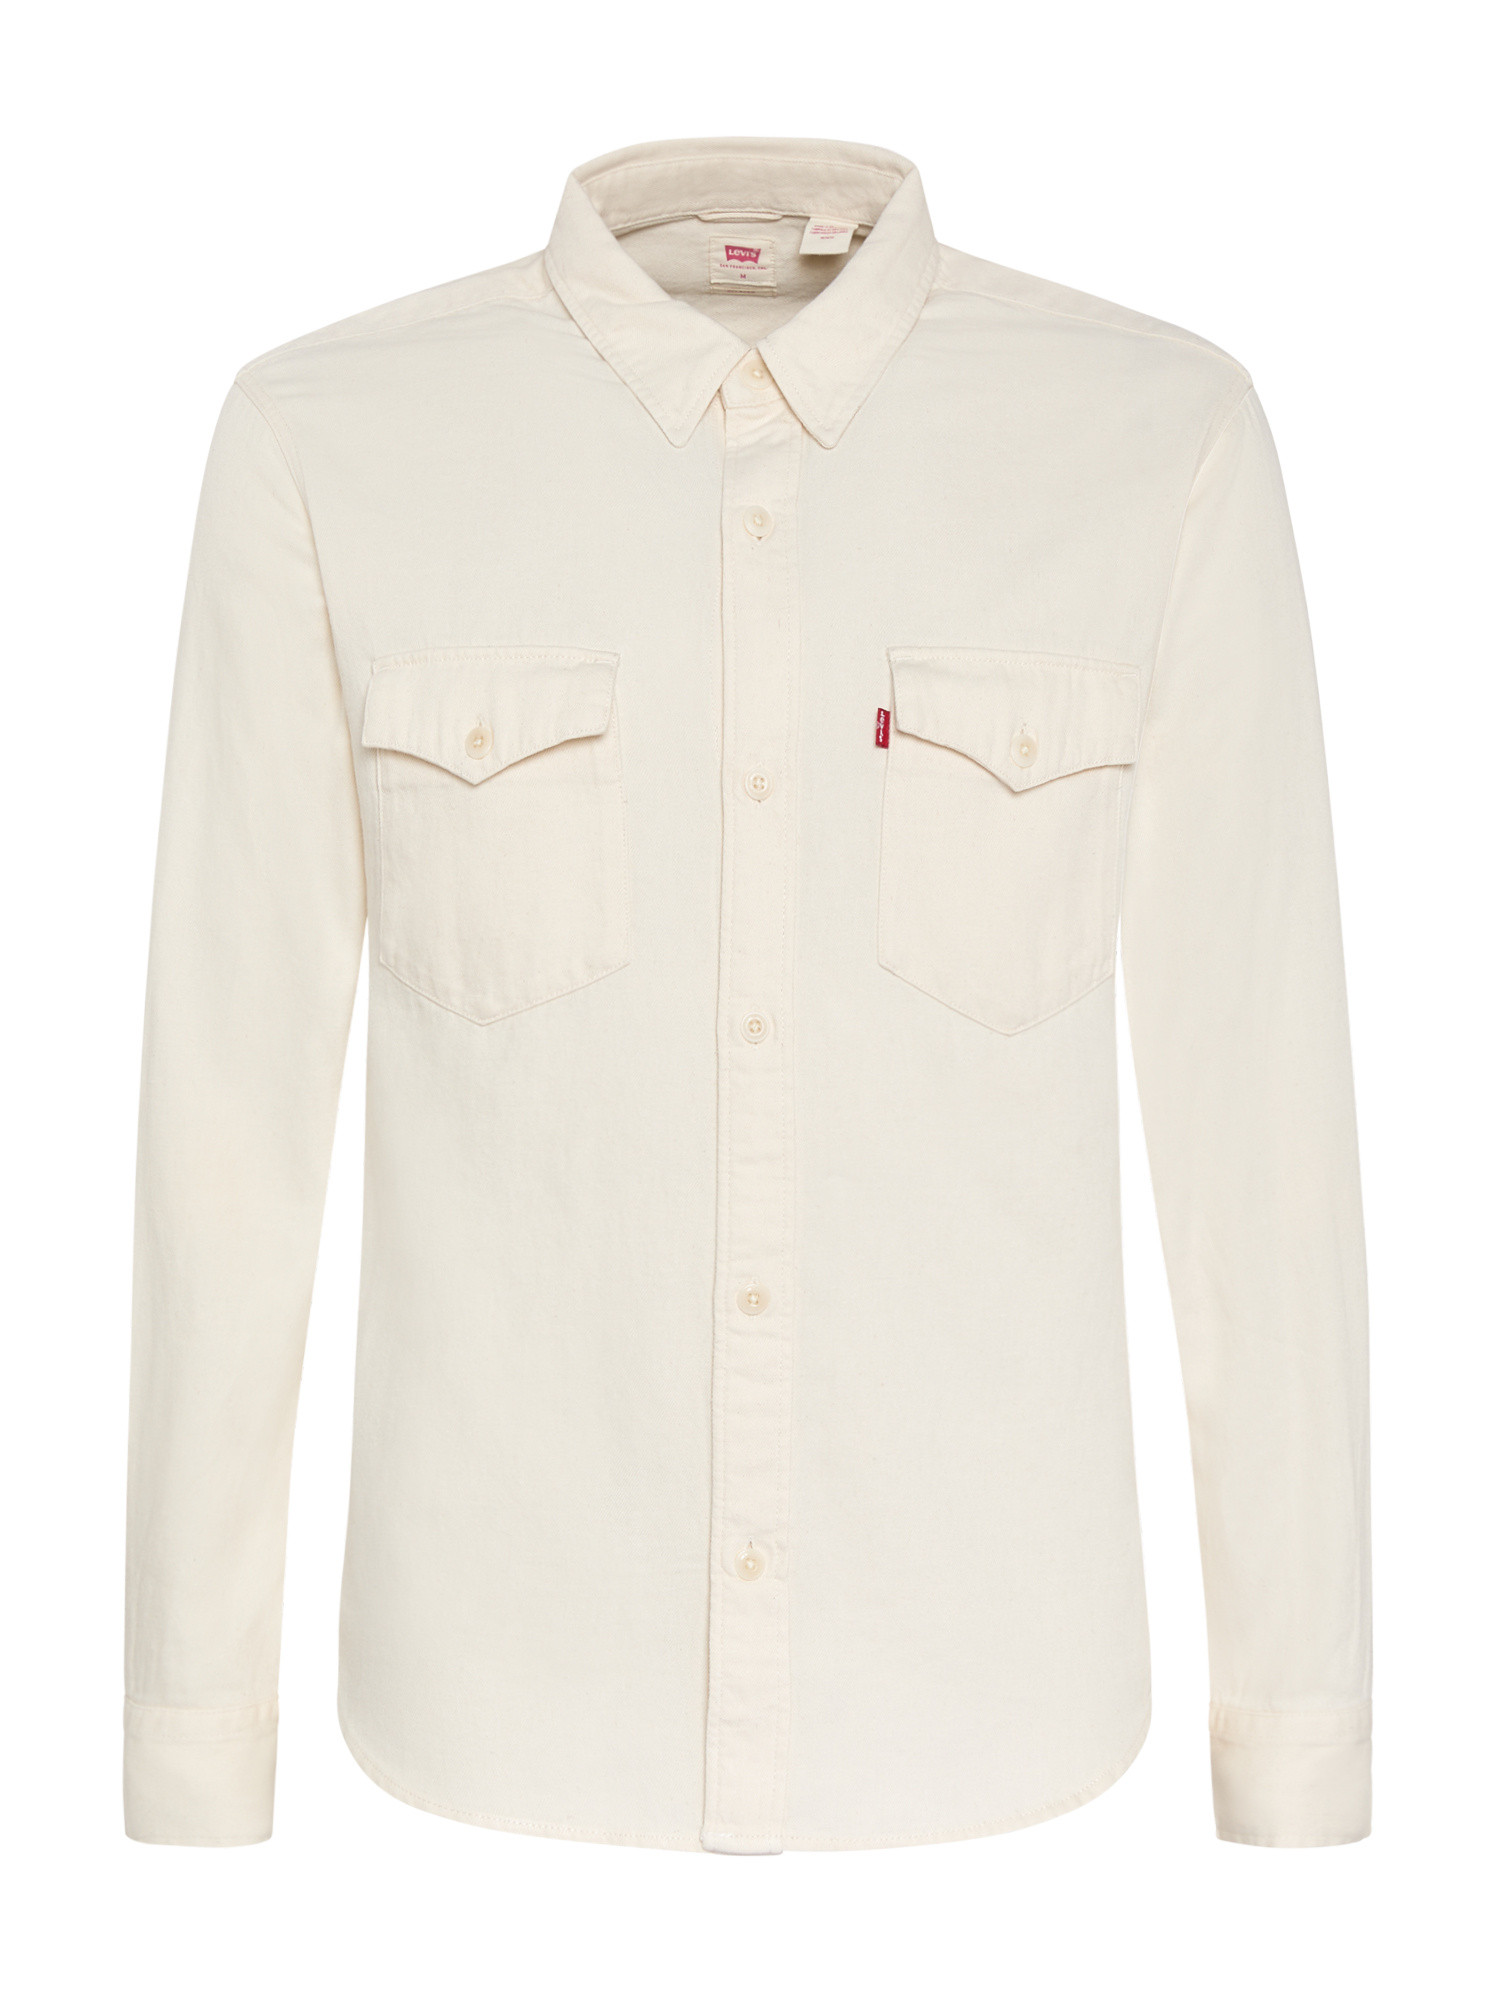 Levi's - Relaxed fit shirt in linen blend, White Cream, large image number 0